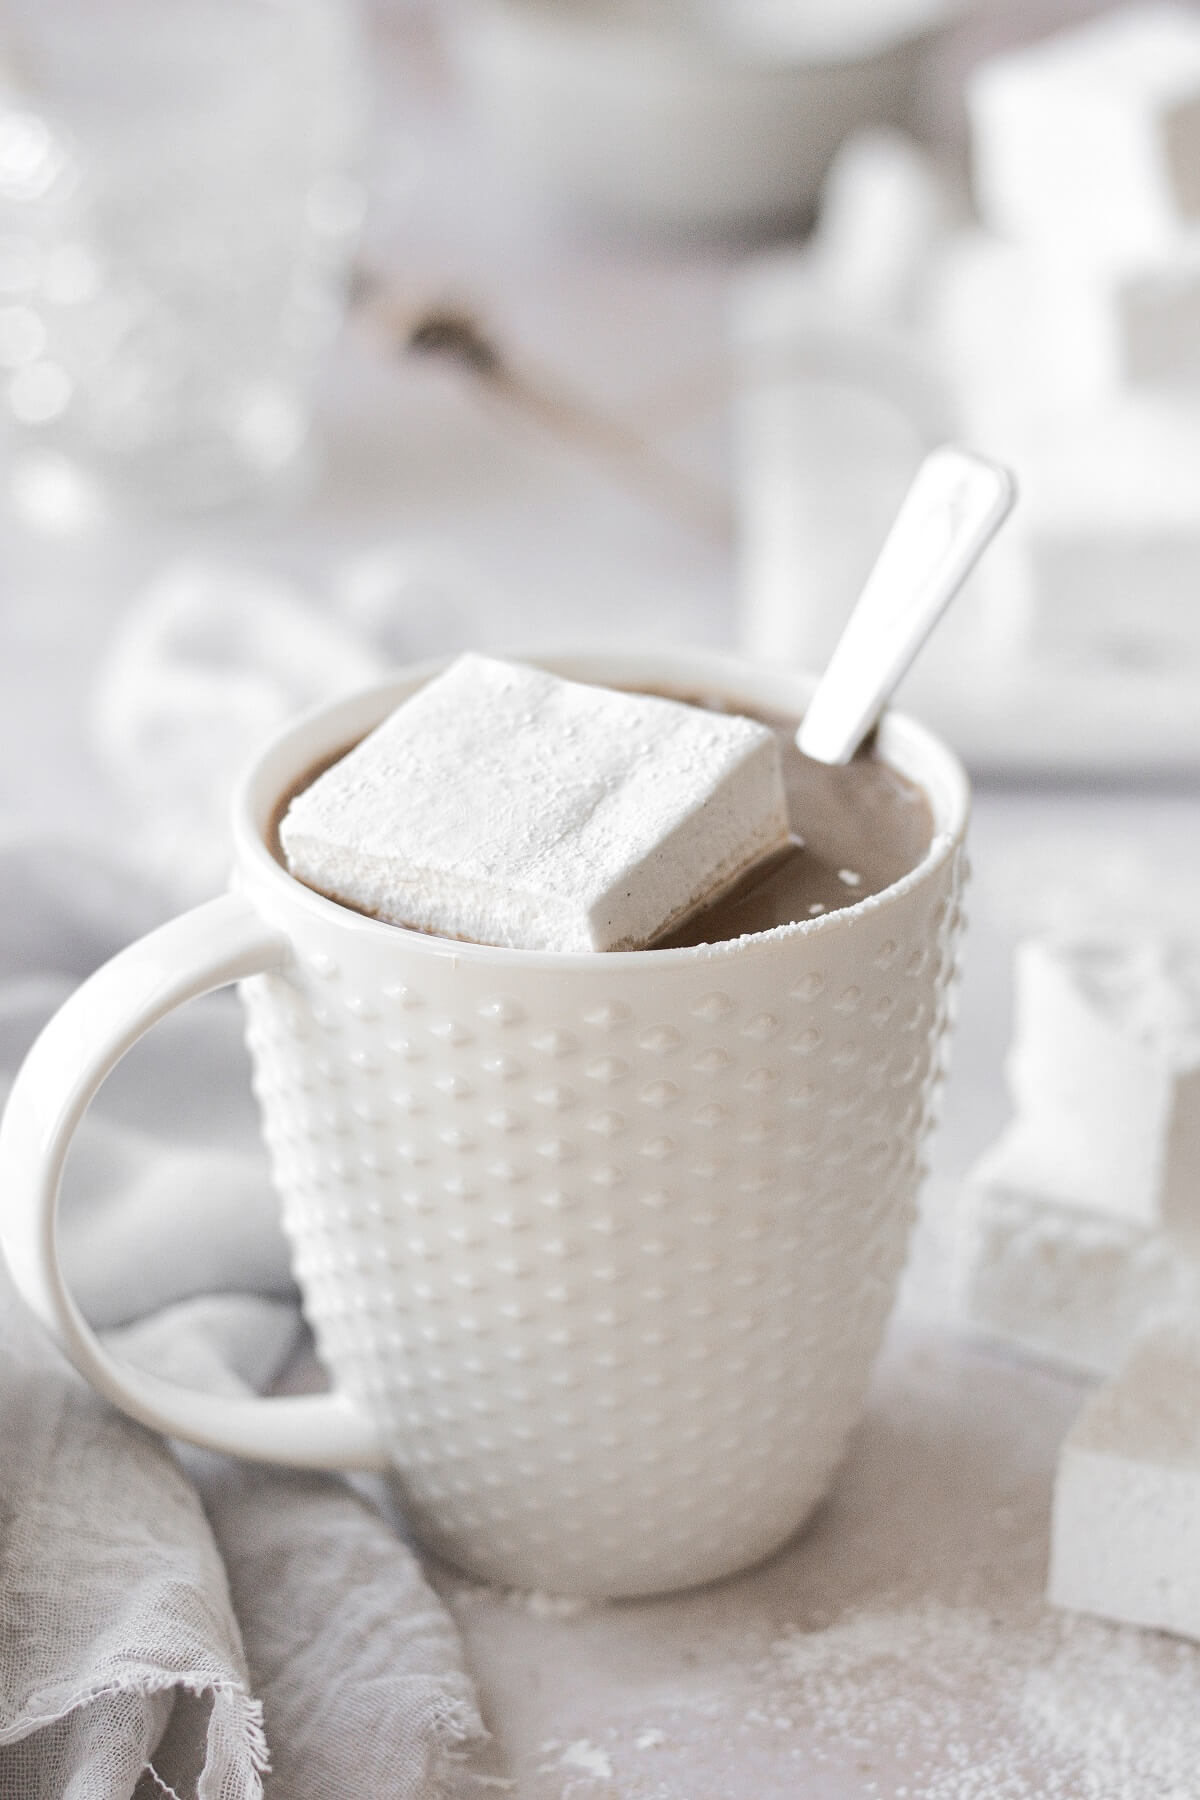 A homemade marshmallow in a white mug filled with hot chocolate.